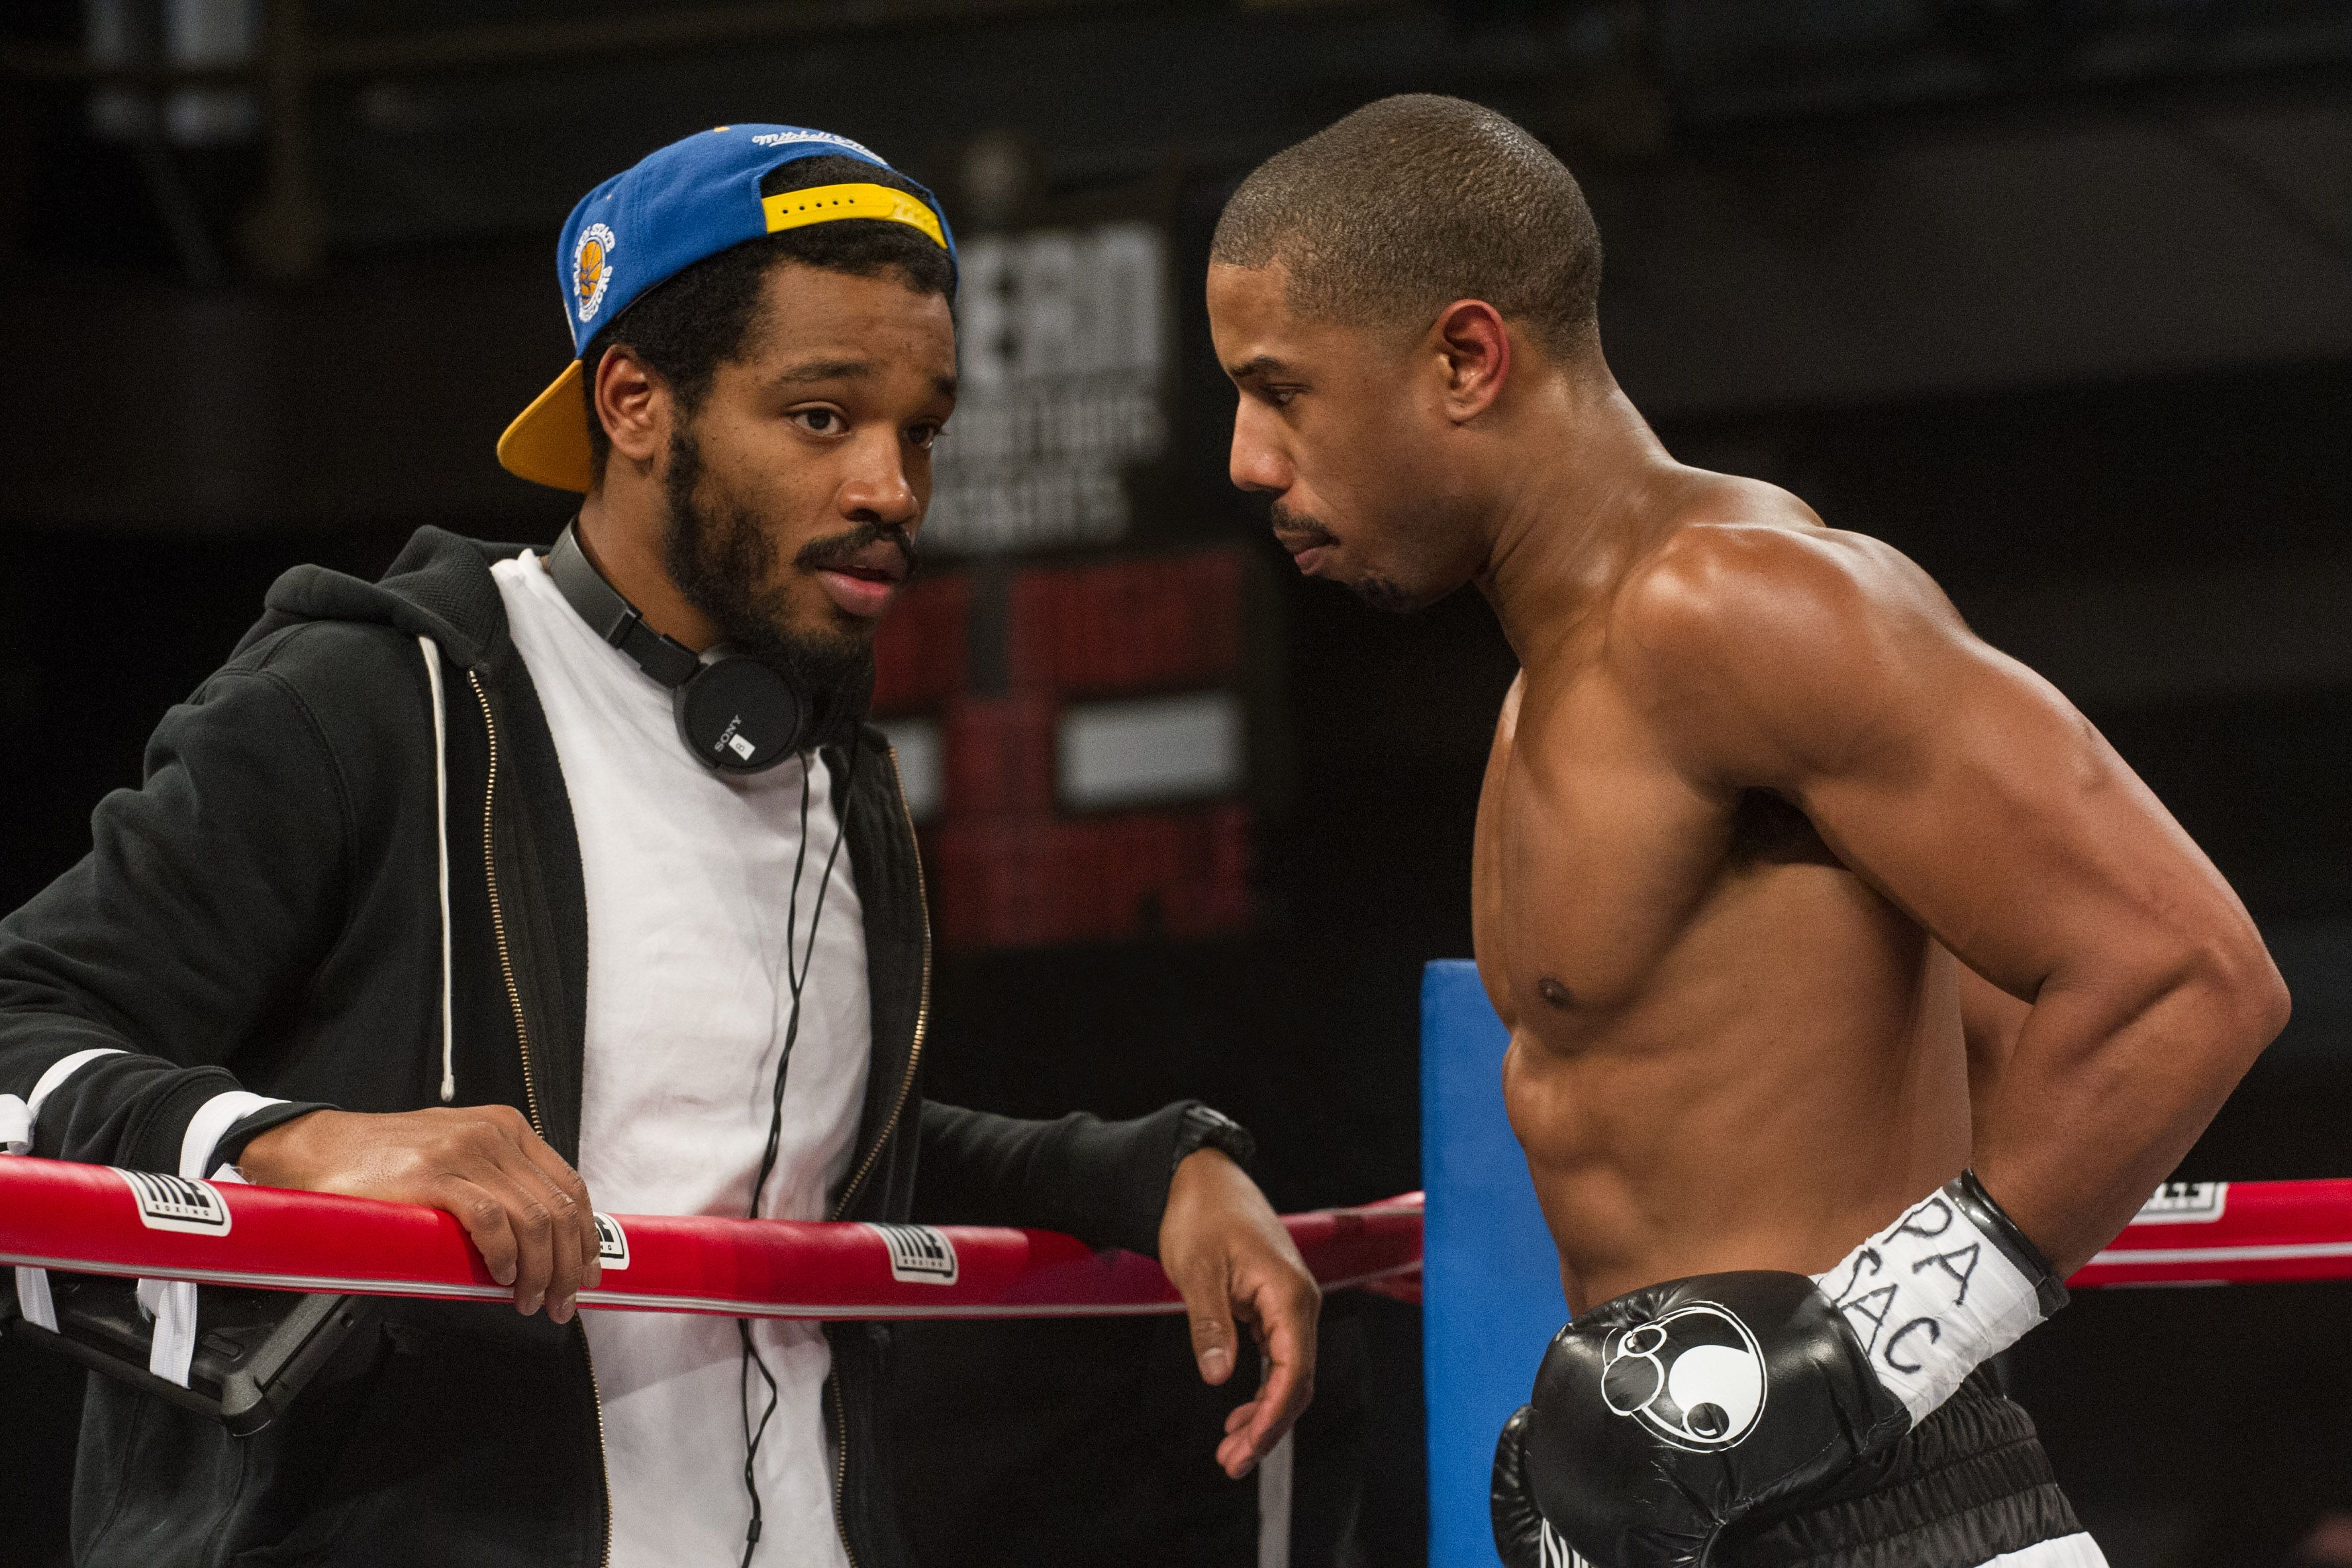 Ryan Coogler Explains Why He's Not Directing Creed 2